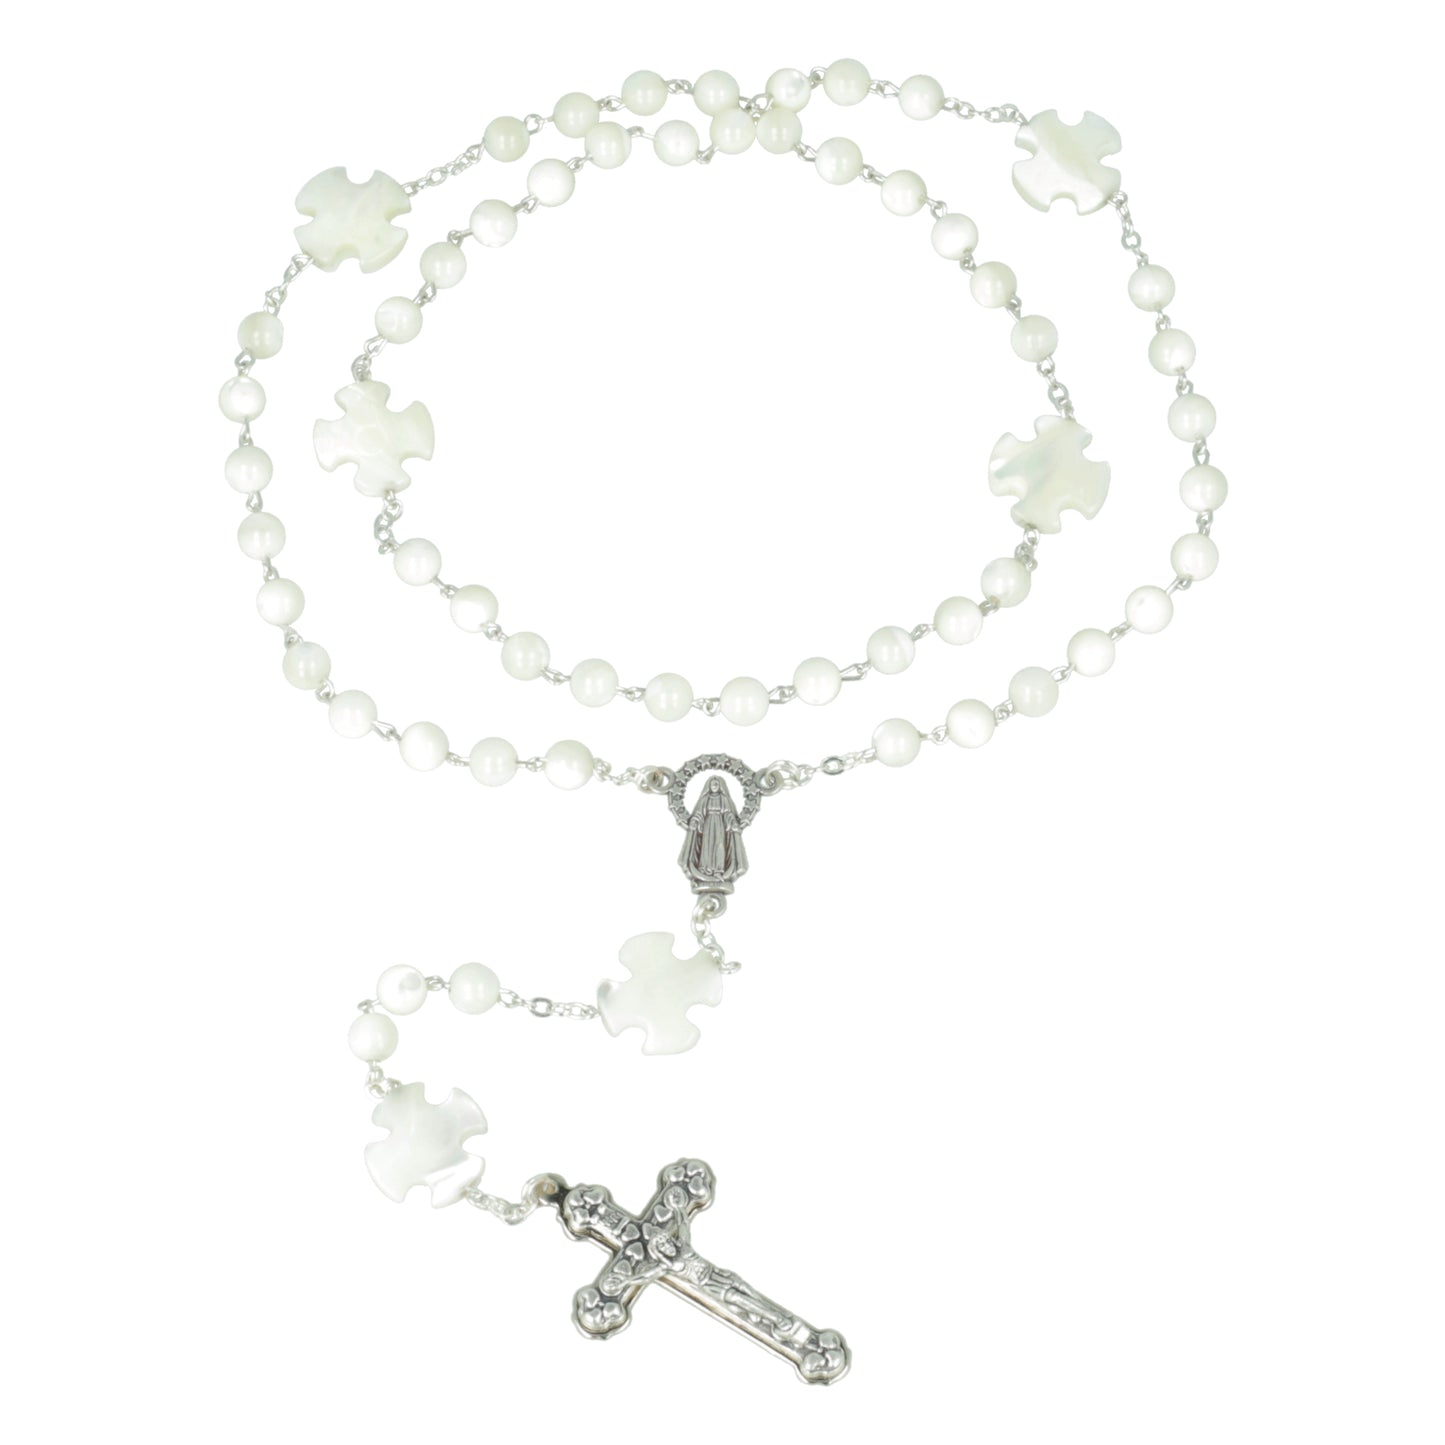 Vero Original Mother Pearl Rosary Souvenirs from Italy